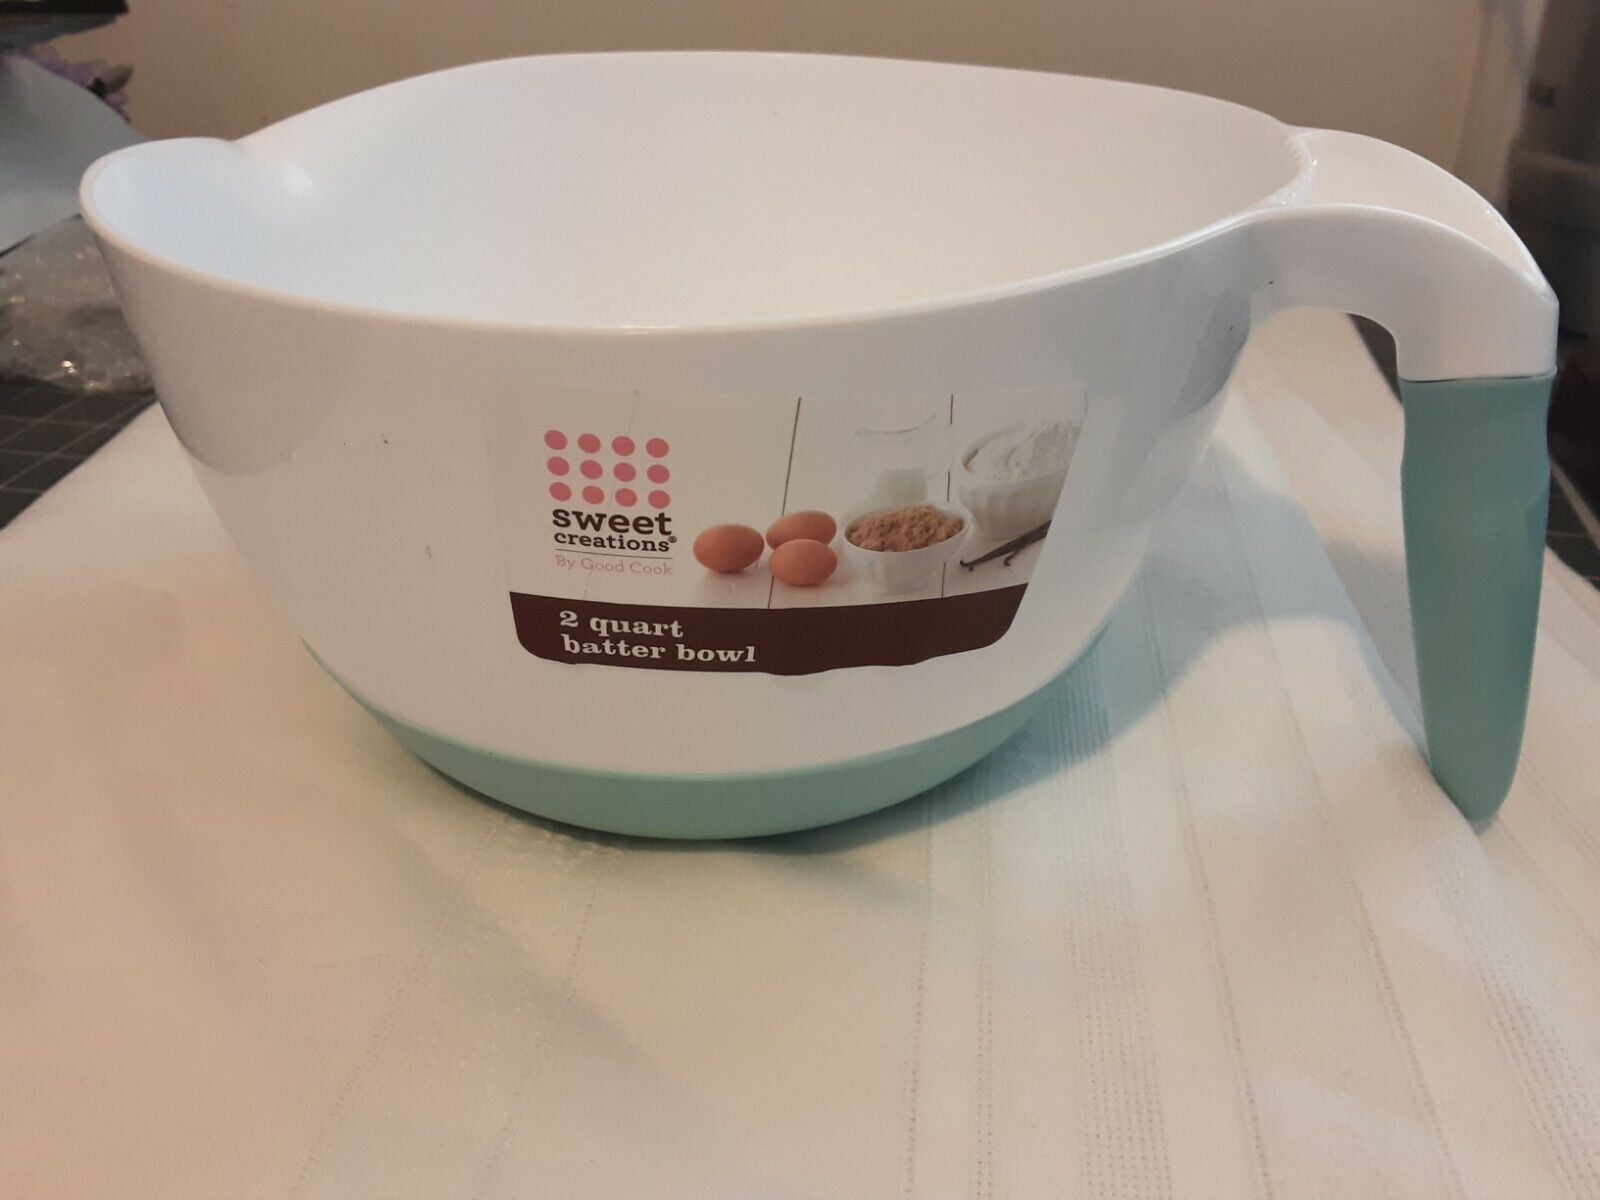 Sweet Creations Batter Bowl by Good Cook